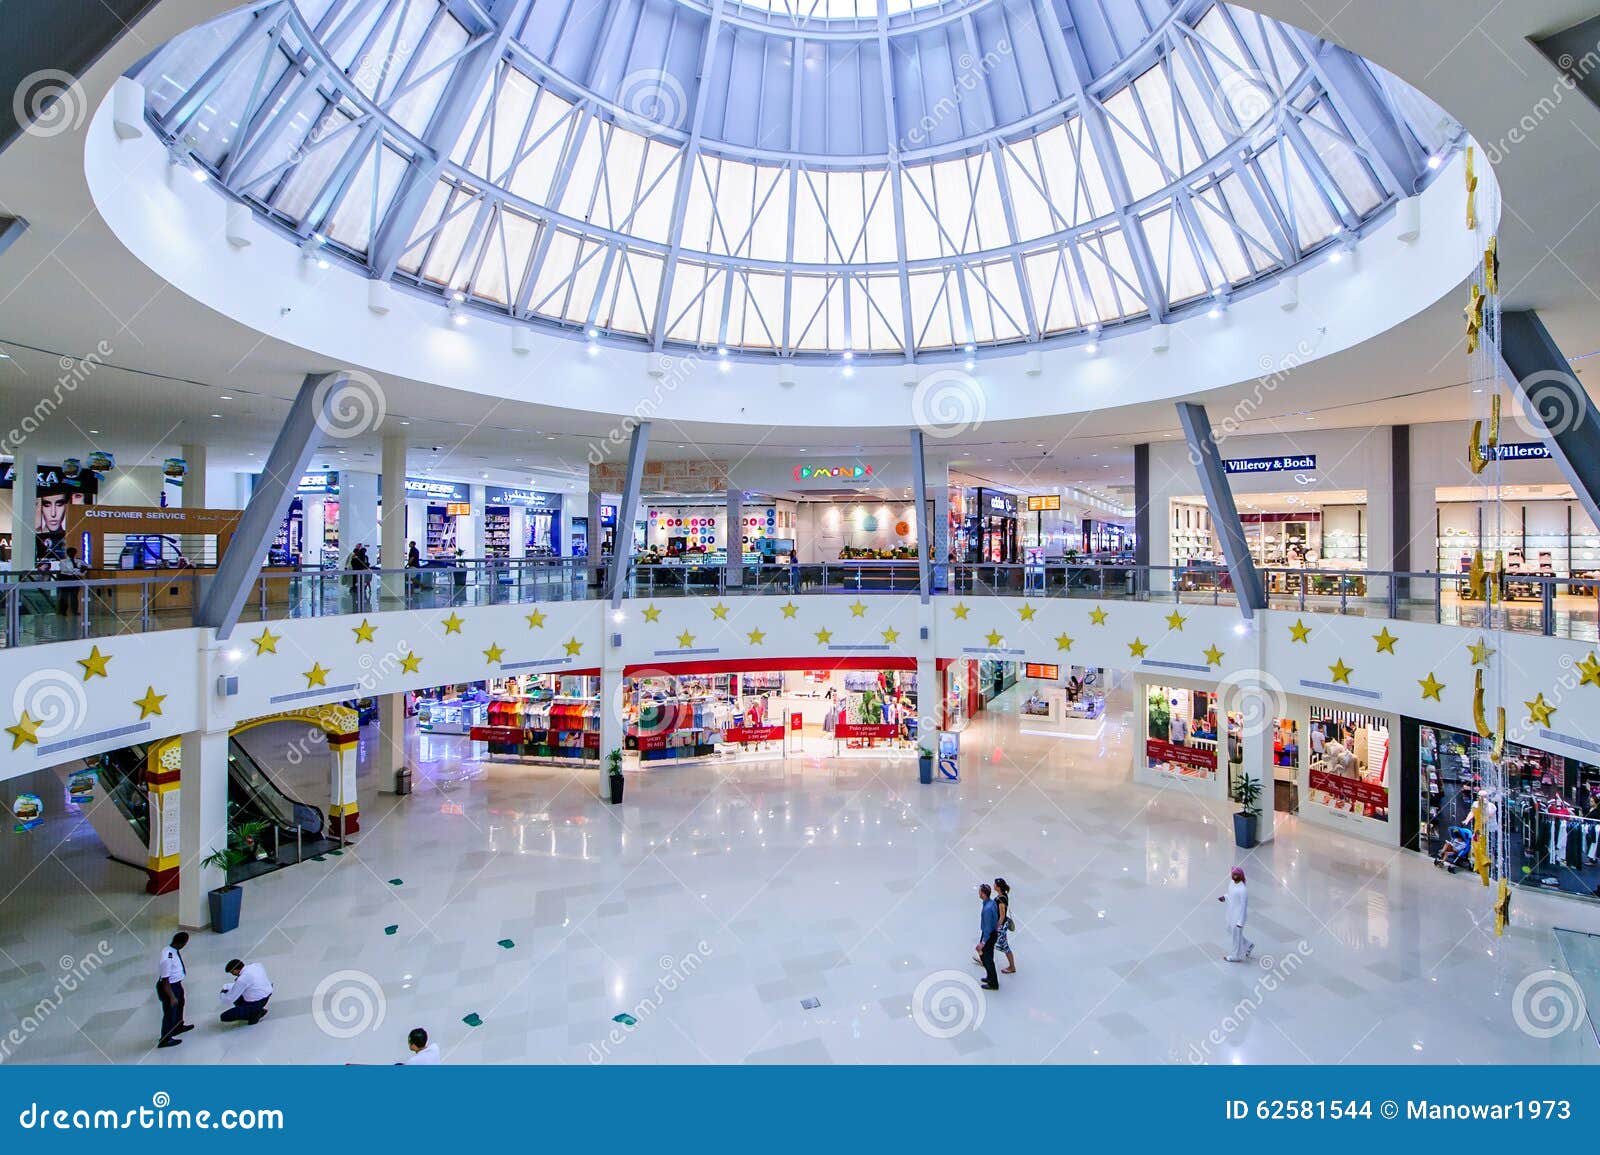 Dubai,UAE.Outlet mall. editorial stock image. Image of building - 62581544